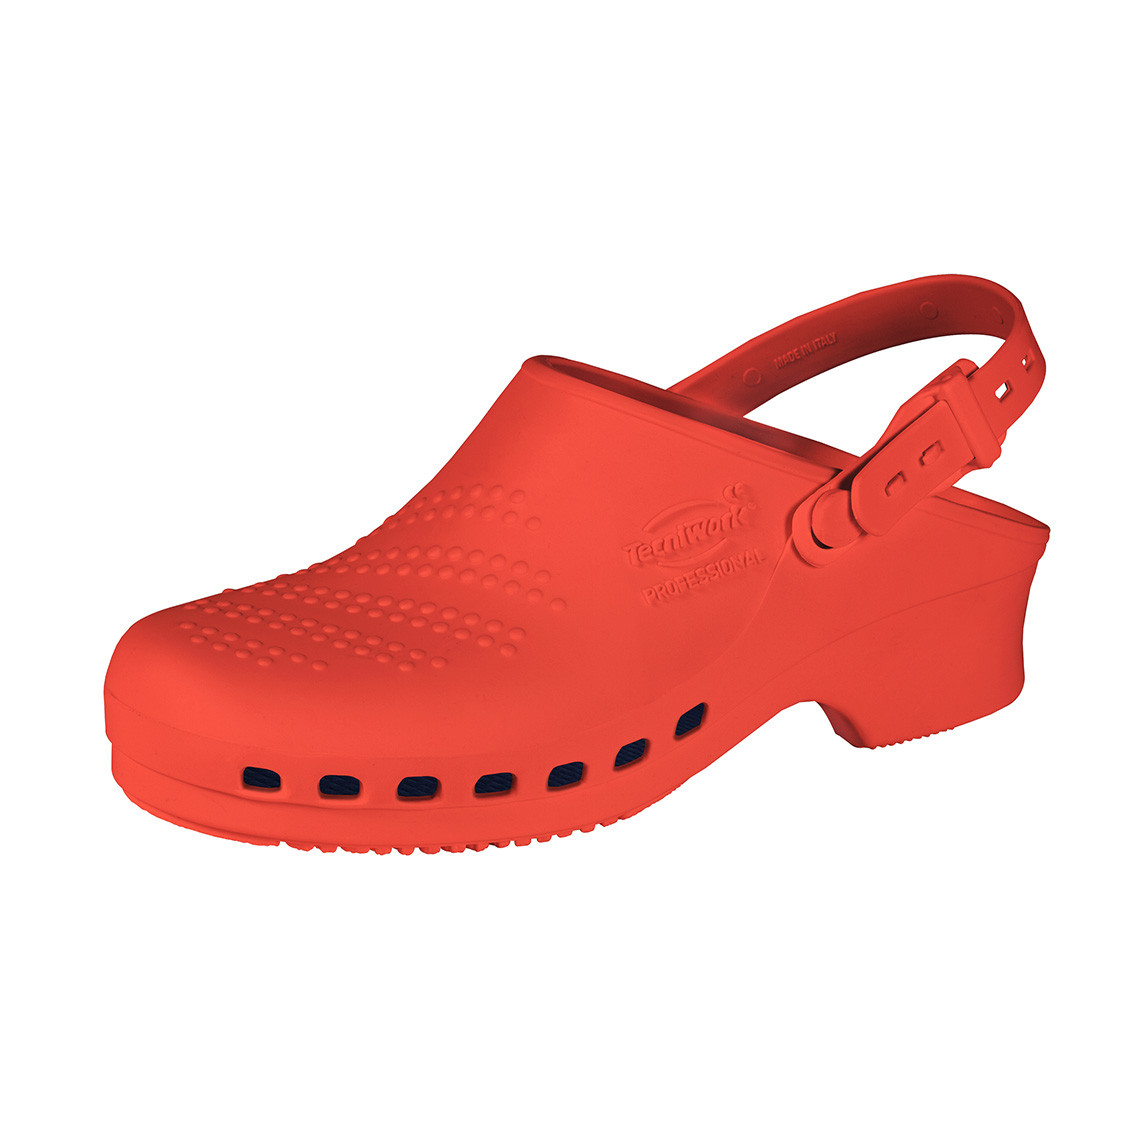 Professional sanitary clogs red Size 40/41